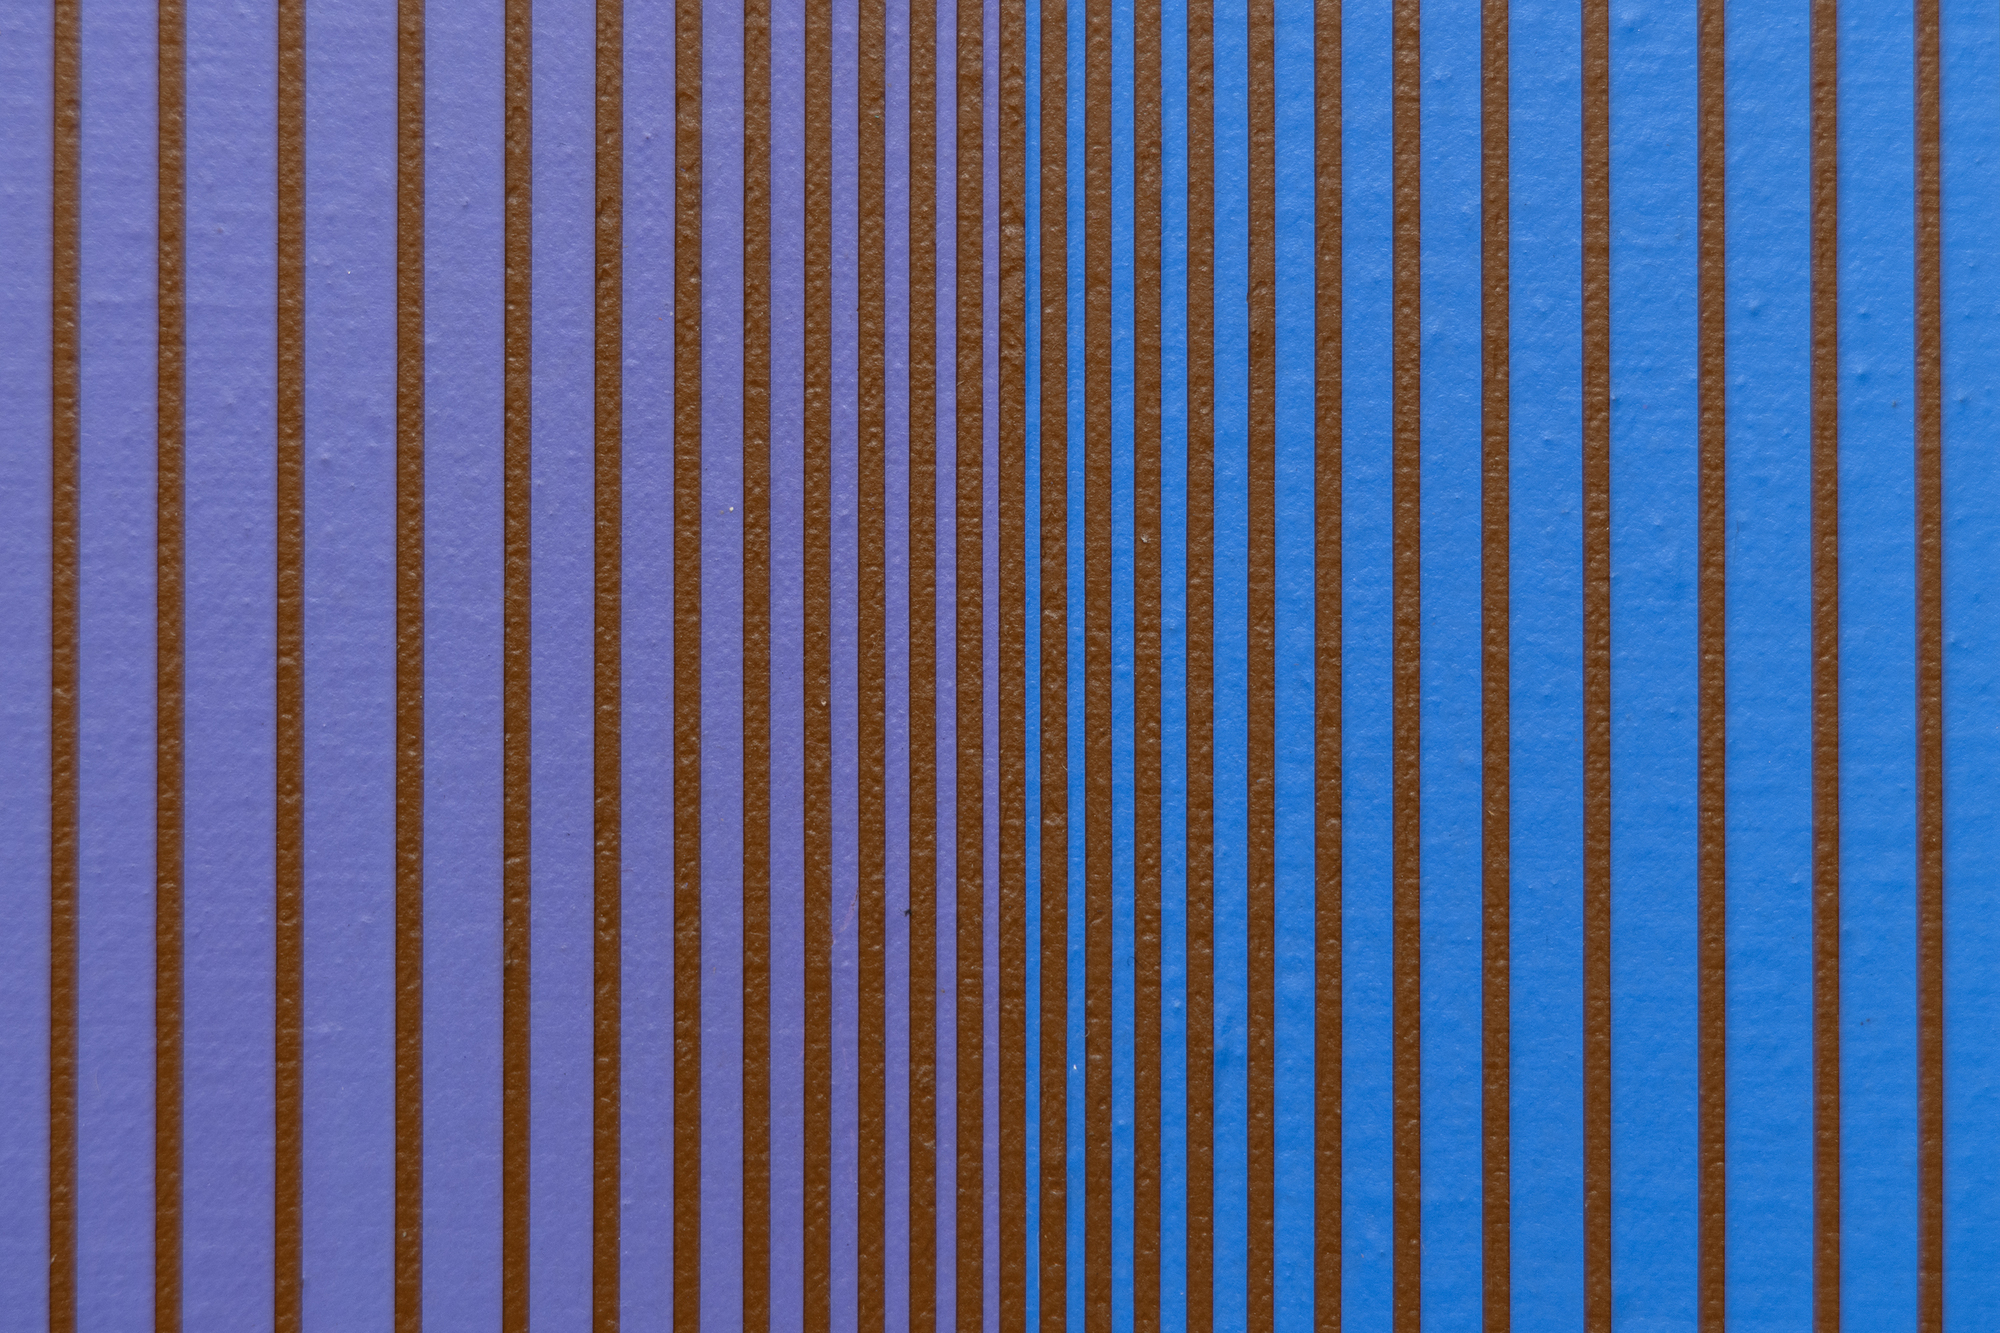 In 1970, Anuszkiewicz began the series Portals, a series of paintings consisting of upright rectangles formed from soft colors with vertical lines breaking up the color field and framing central, luminous rectangles. The orientation of "Blueing", however, presents an opportunity to recalibrate the artist's usual verticality of the Portal series, suggestive of transcendence, and transpose it to a horizontal plane implying connection rather than ascension. In the spirit of perceptual experimentation, the portal here, red, vividly set within the softer surrounding bands of color, provides a stronger contrast than usual and serves as a focal point anchoring the composition. An uncommon, if not unique, horizontal painting in the Portals series, "Blueing" underscores the complex interplay between an artist's intention, formal composition, and viewer perception. It engages us in a vibrant dialogue between the realms of the abstract and the visceral, encouraging a personal and immersive encounter.